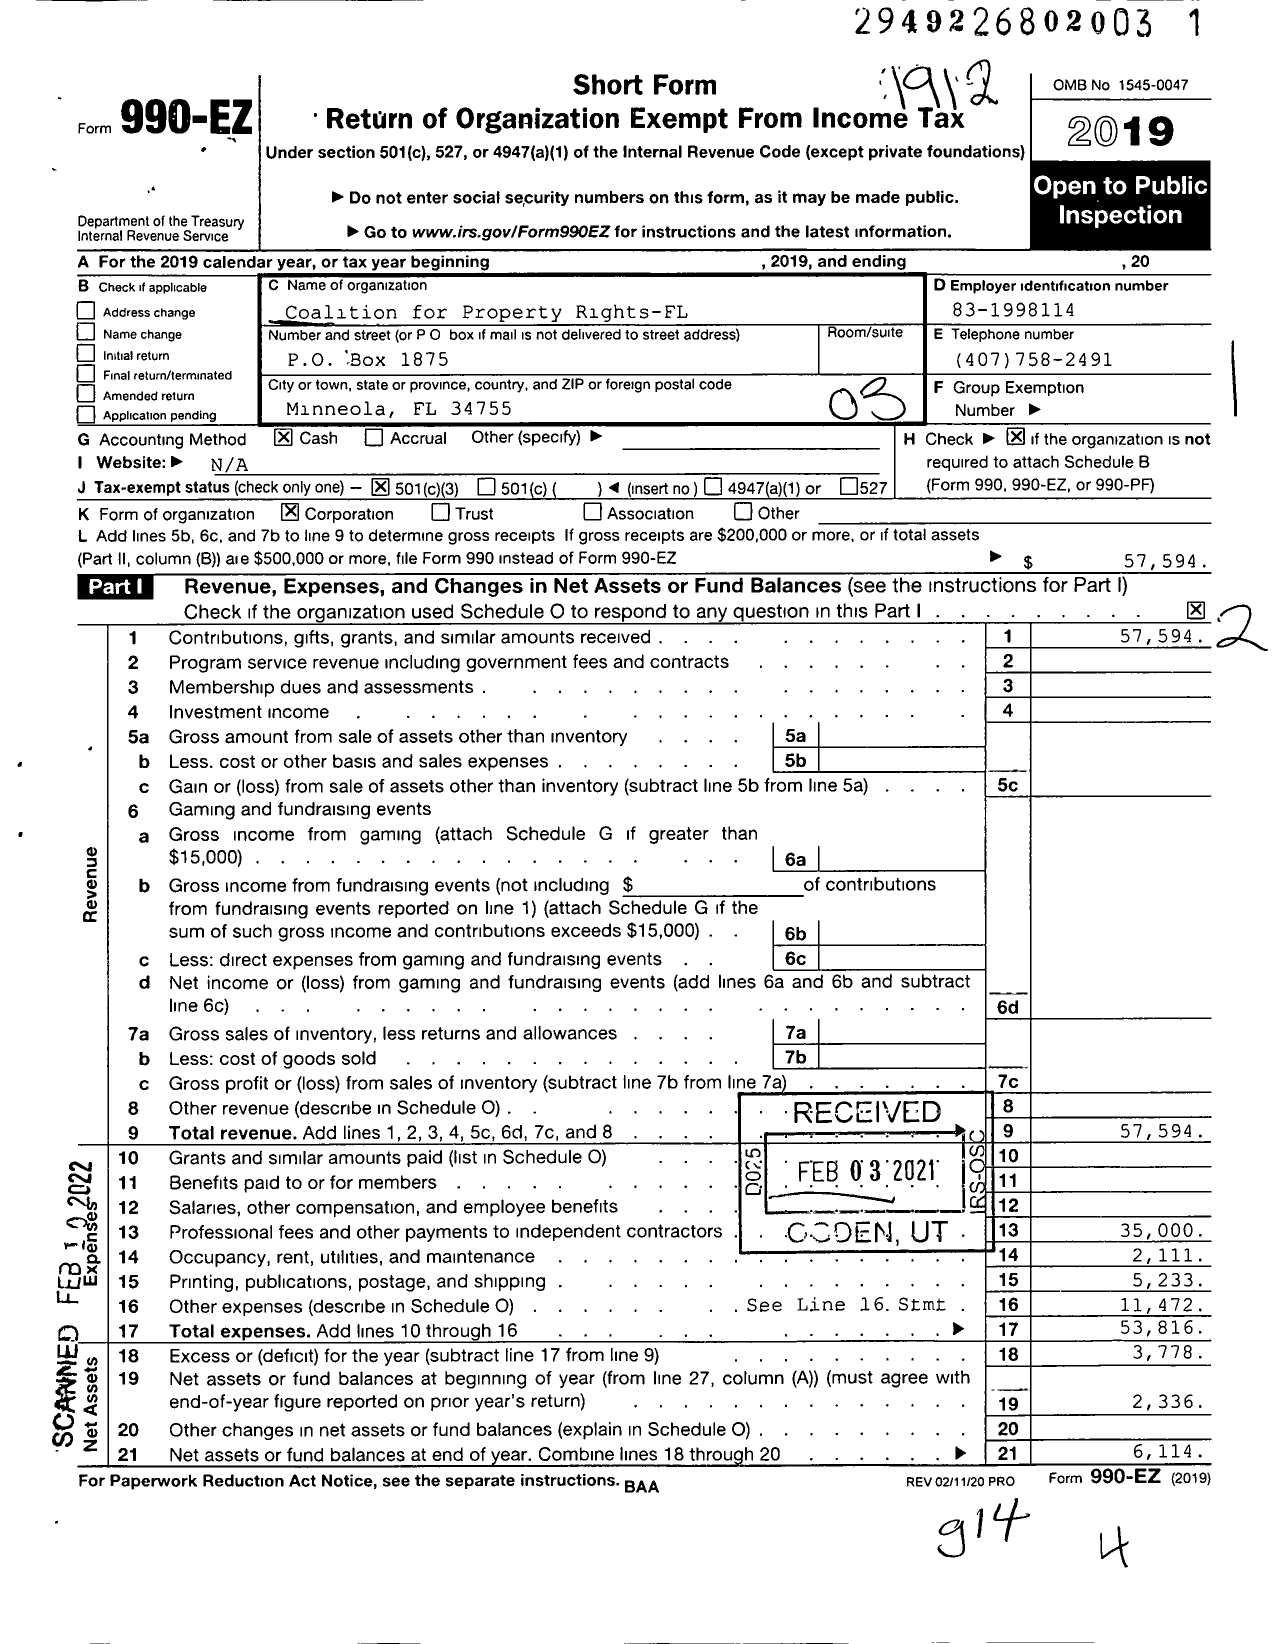 Image of first page of 2019 Form 990EZ for Coalition for Property Rights-Fl